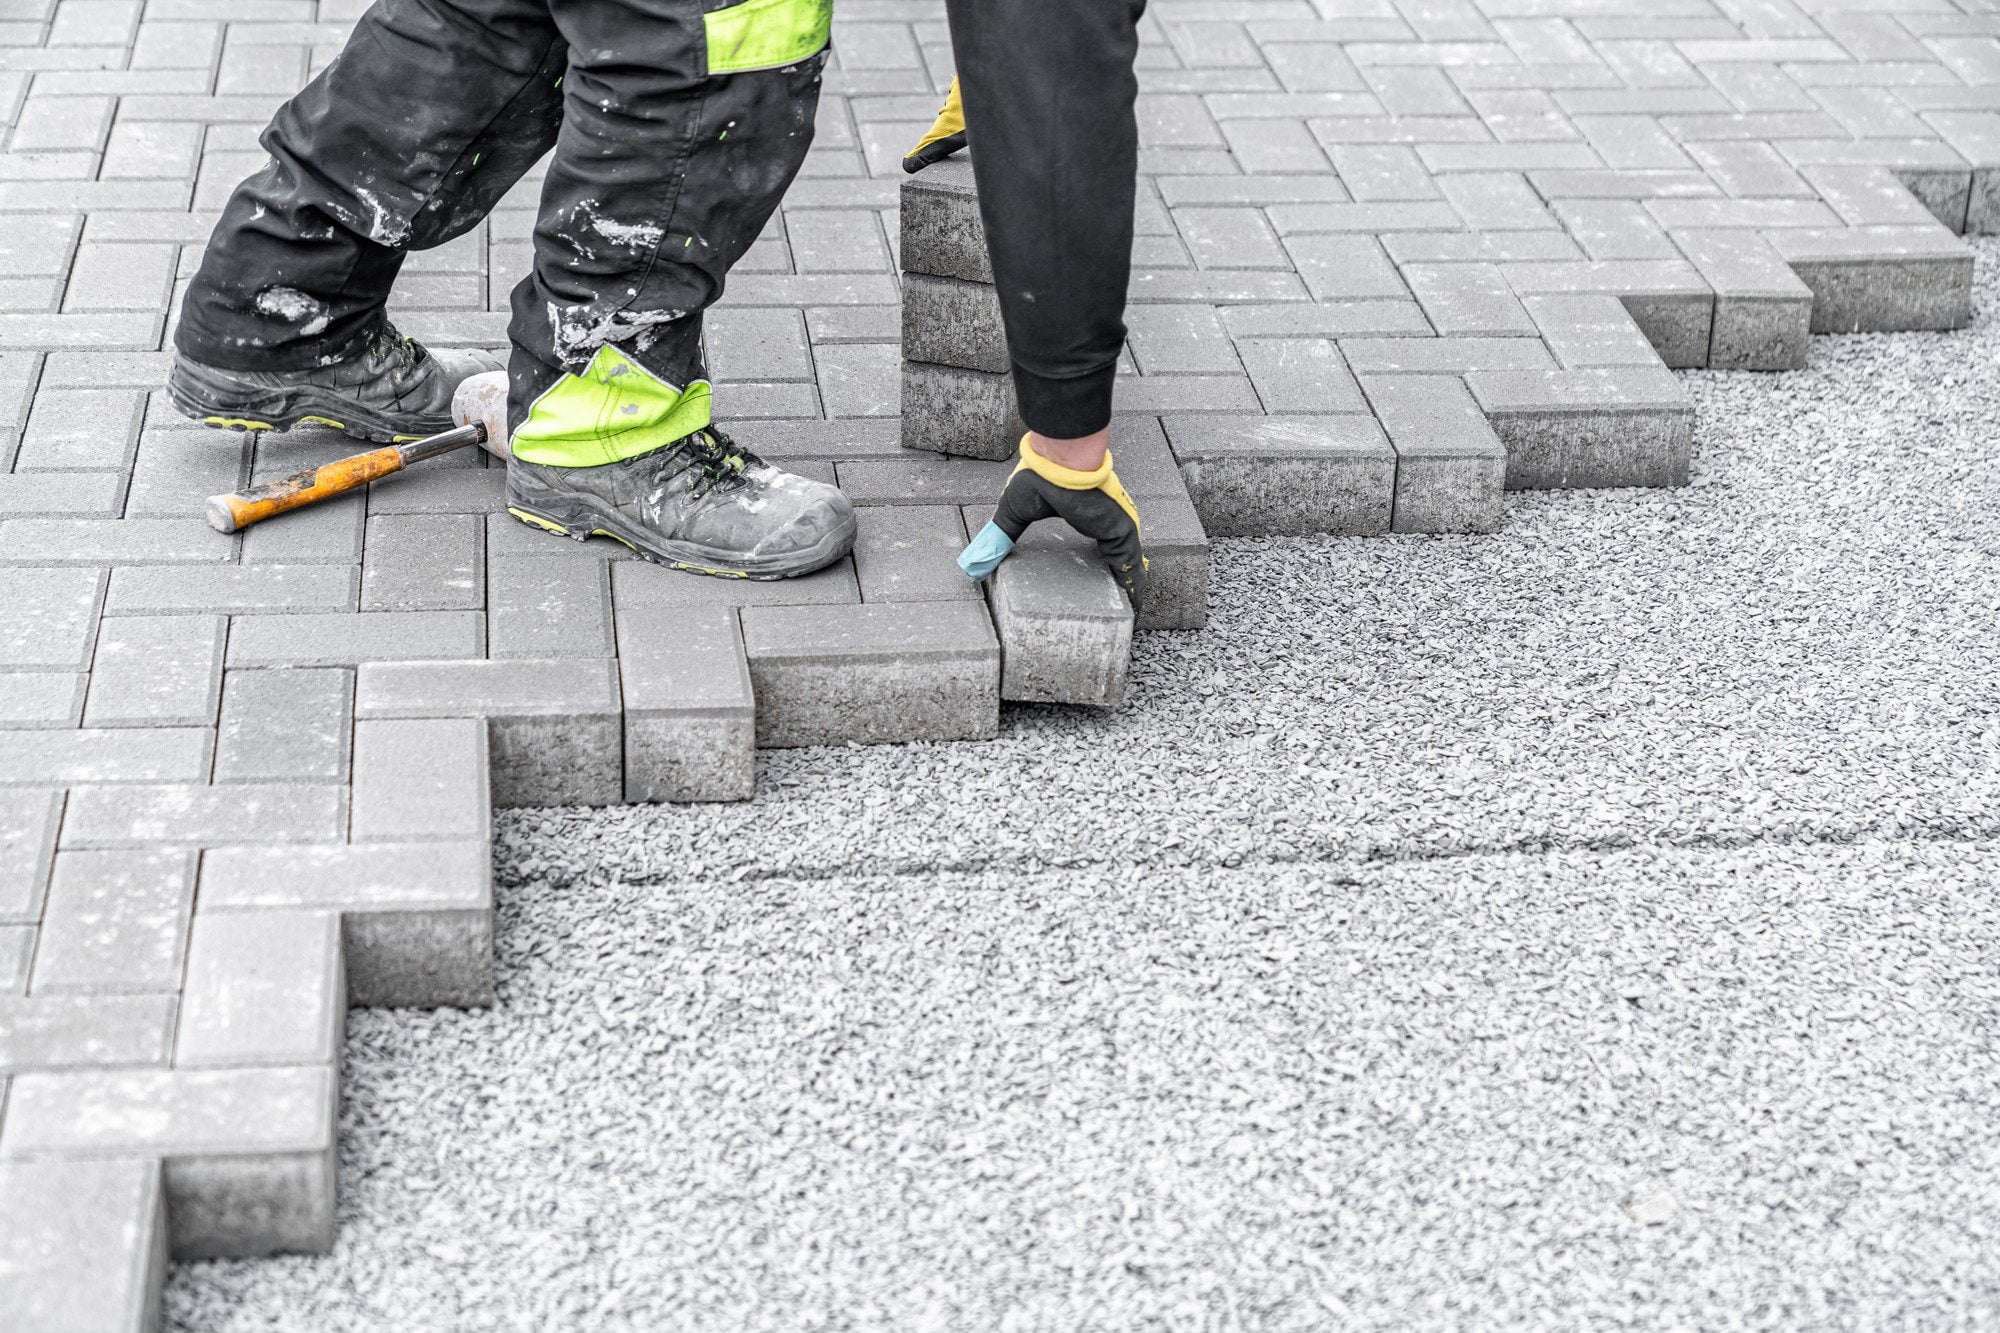 The image shows a person engaged in laying paving blocks or bricks. The individual is wearing work pants and high-visibility clothing, which suggests they are a construction worker or laborer. In front of them is a surface covered with a layer of fine gravel or aggregate, which serves as a base for the paving stones. They are holding one of the blocks with gloved hands, preparing to set it in place. To the left, there is a rubber mallet resting on the incomplete paved surface, likely used to tap the blocks into precise alignment and ensure a flat surface. The paving pattern looks to be a simple, staggered linear design.